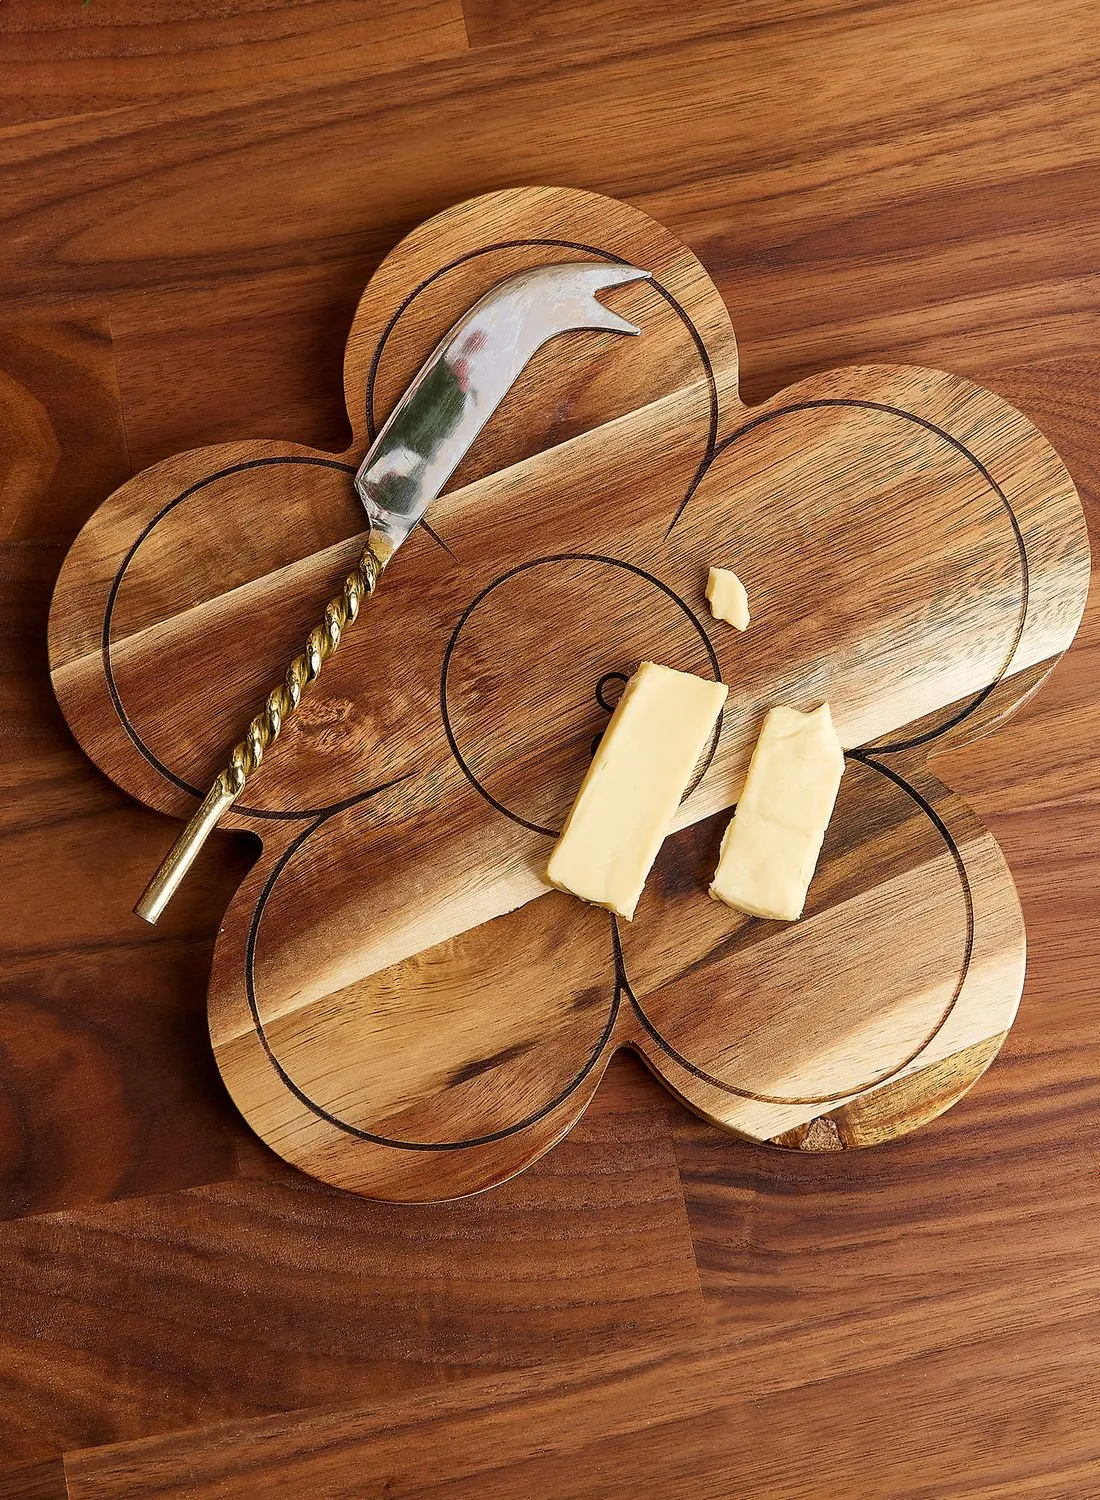 Typo Shaped Cheese Board